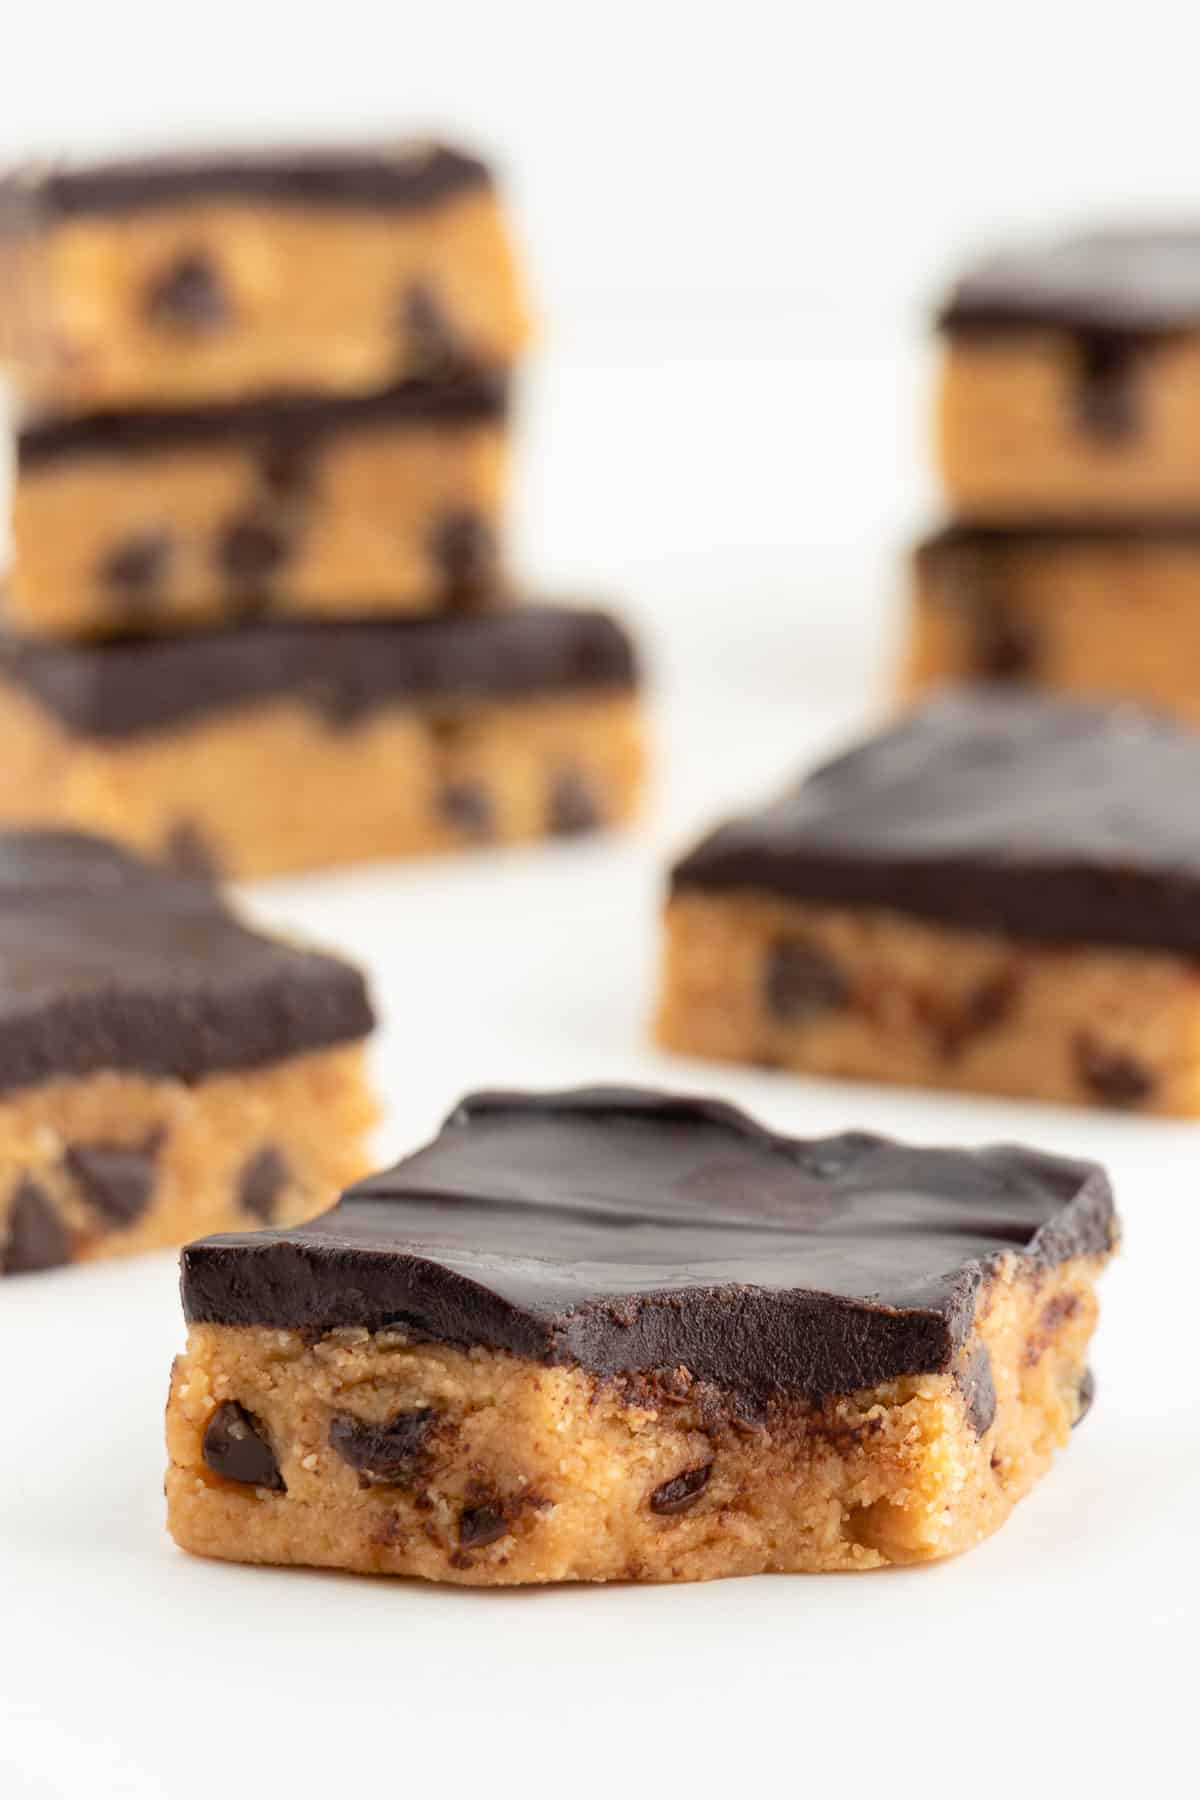 a vegan cookie dough bar with a bite taken out of it and stacks of more bars behind it